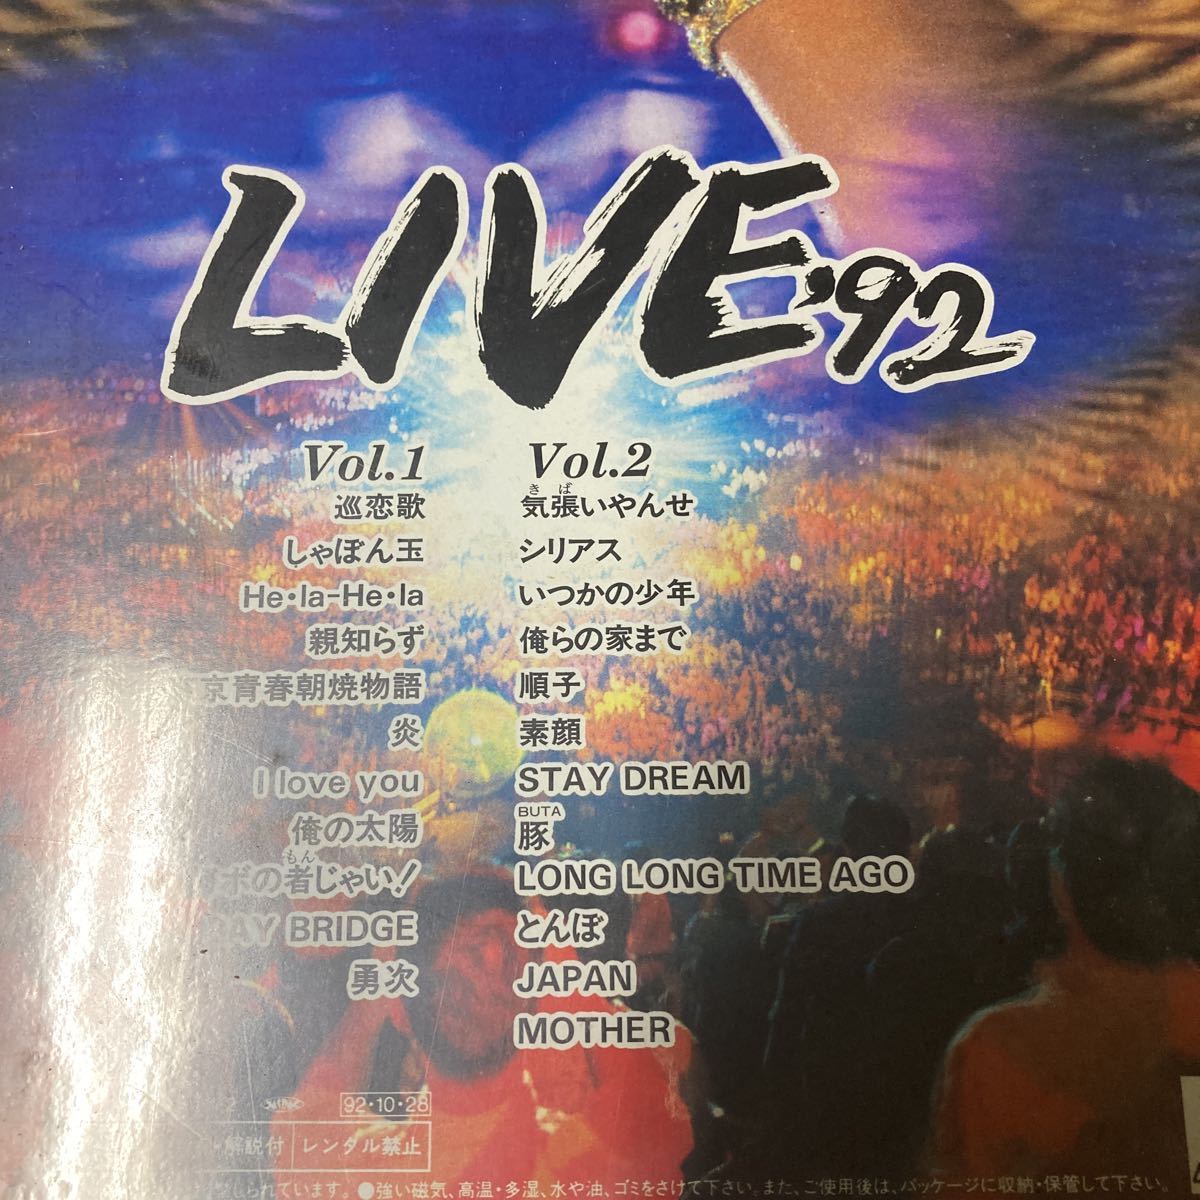 【A23700089】長渕剛 ライブビデオ　Live92 Japan in Tokyo D ome VHS 映像　TOVF-1151.2 TOSHIBA EMI 巡恋歌　しゃぼん玉他_画像8